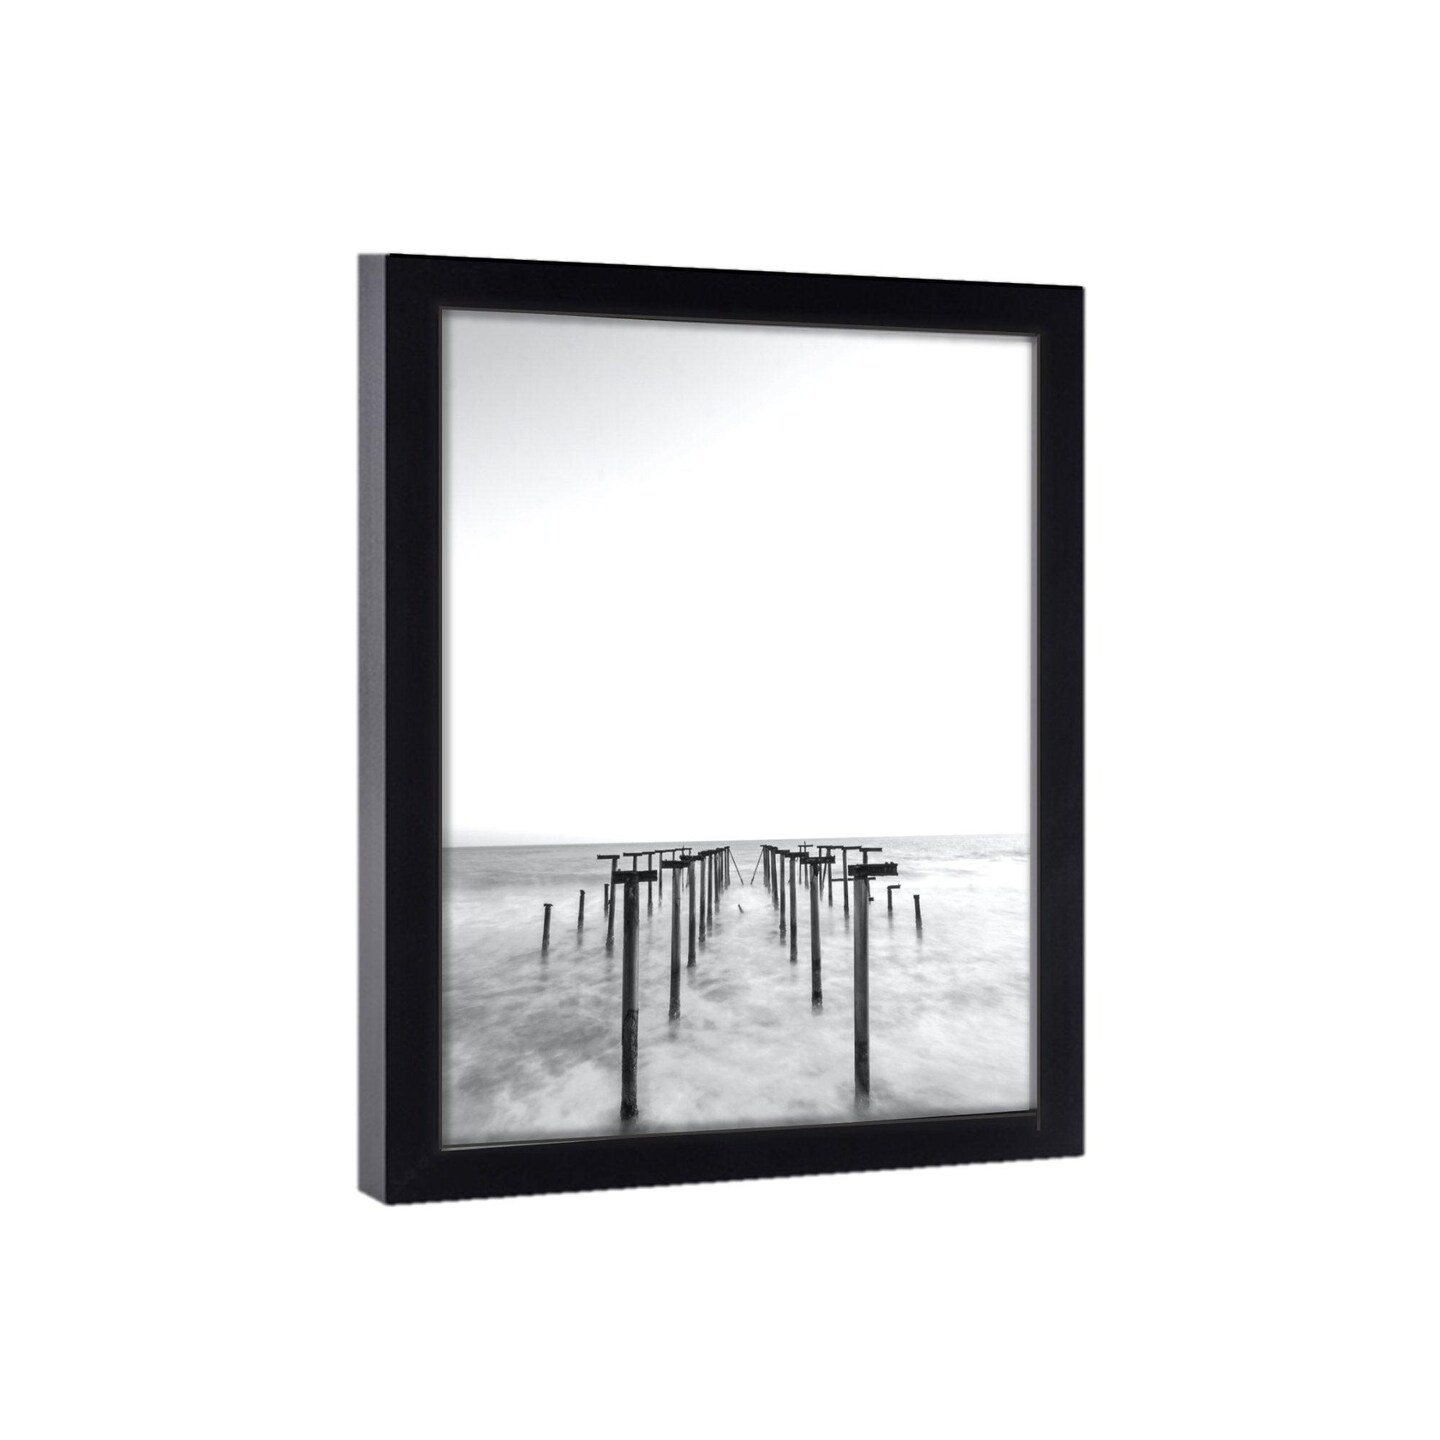  euwazram 30x40 Picture Frame - Single Frame, Matte Black 30x40  Frame, 30 x 40 Poster Frame for Artwork, Puzzles, Photos and Movie Posters